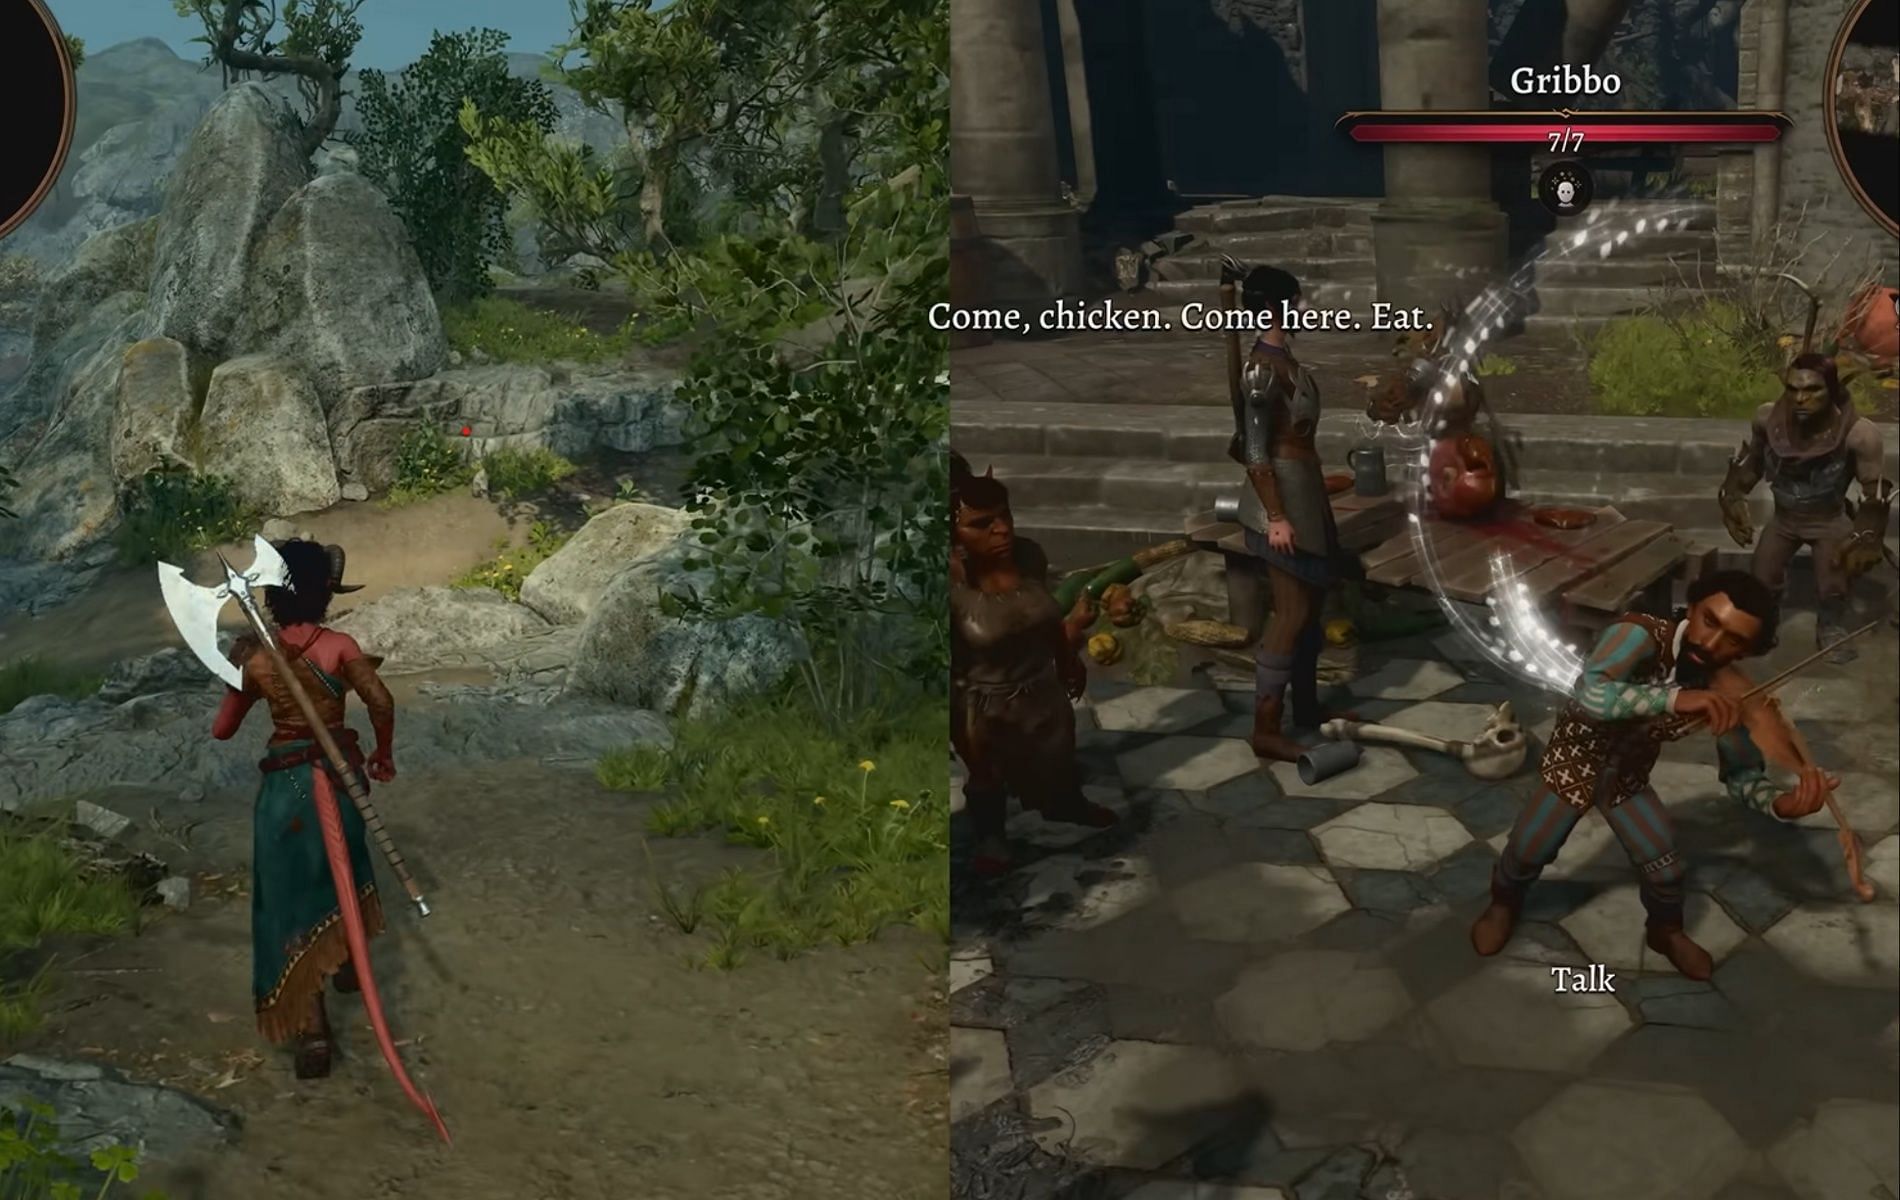 How to play Split-screen couch co-op in Baldurs Gate 3?